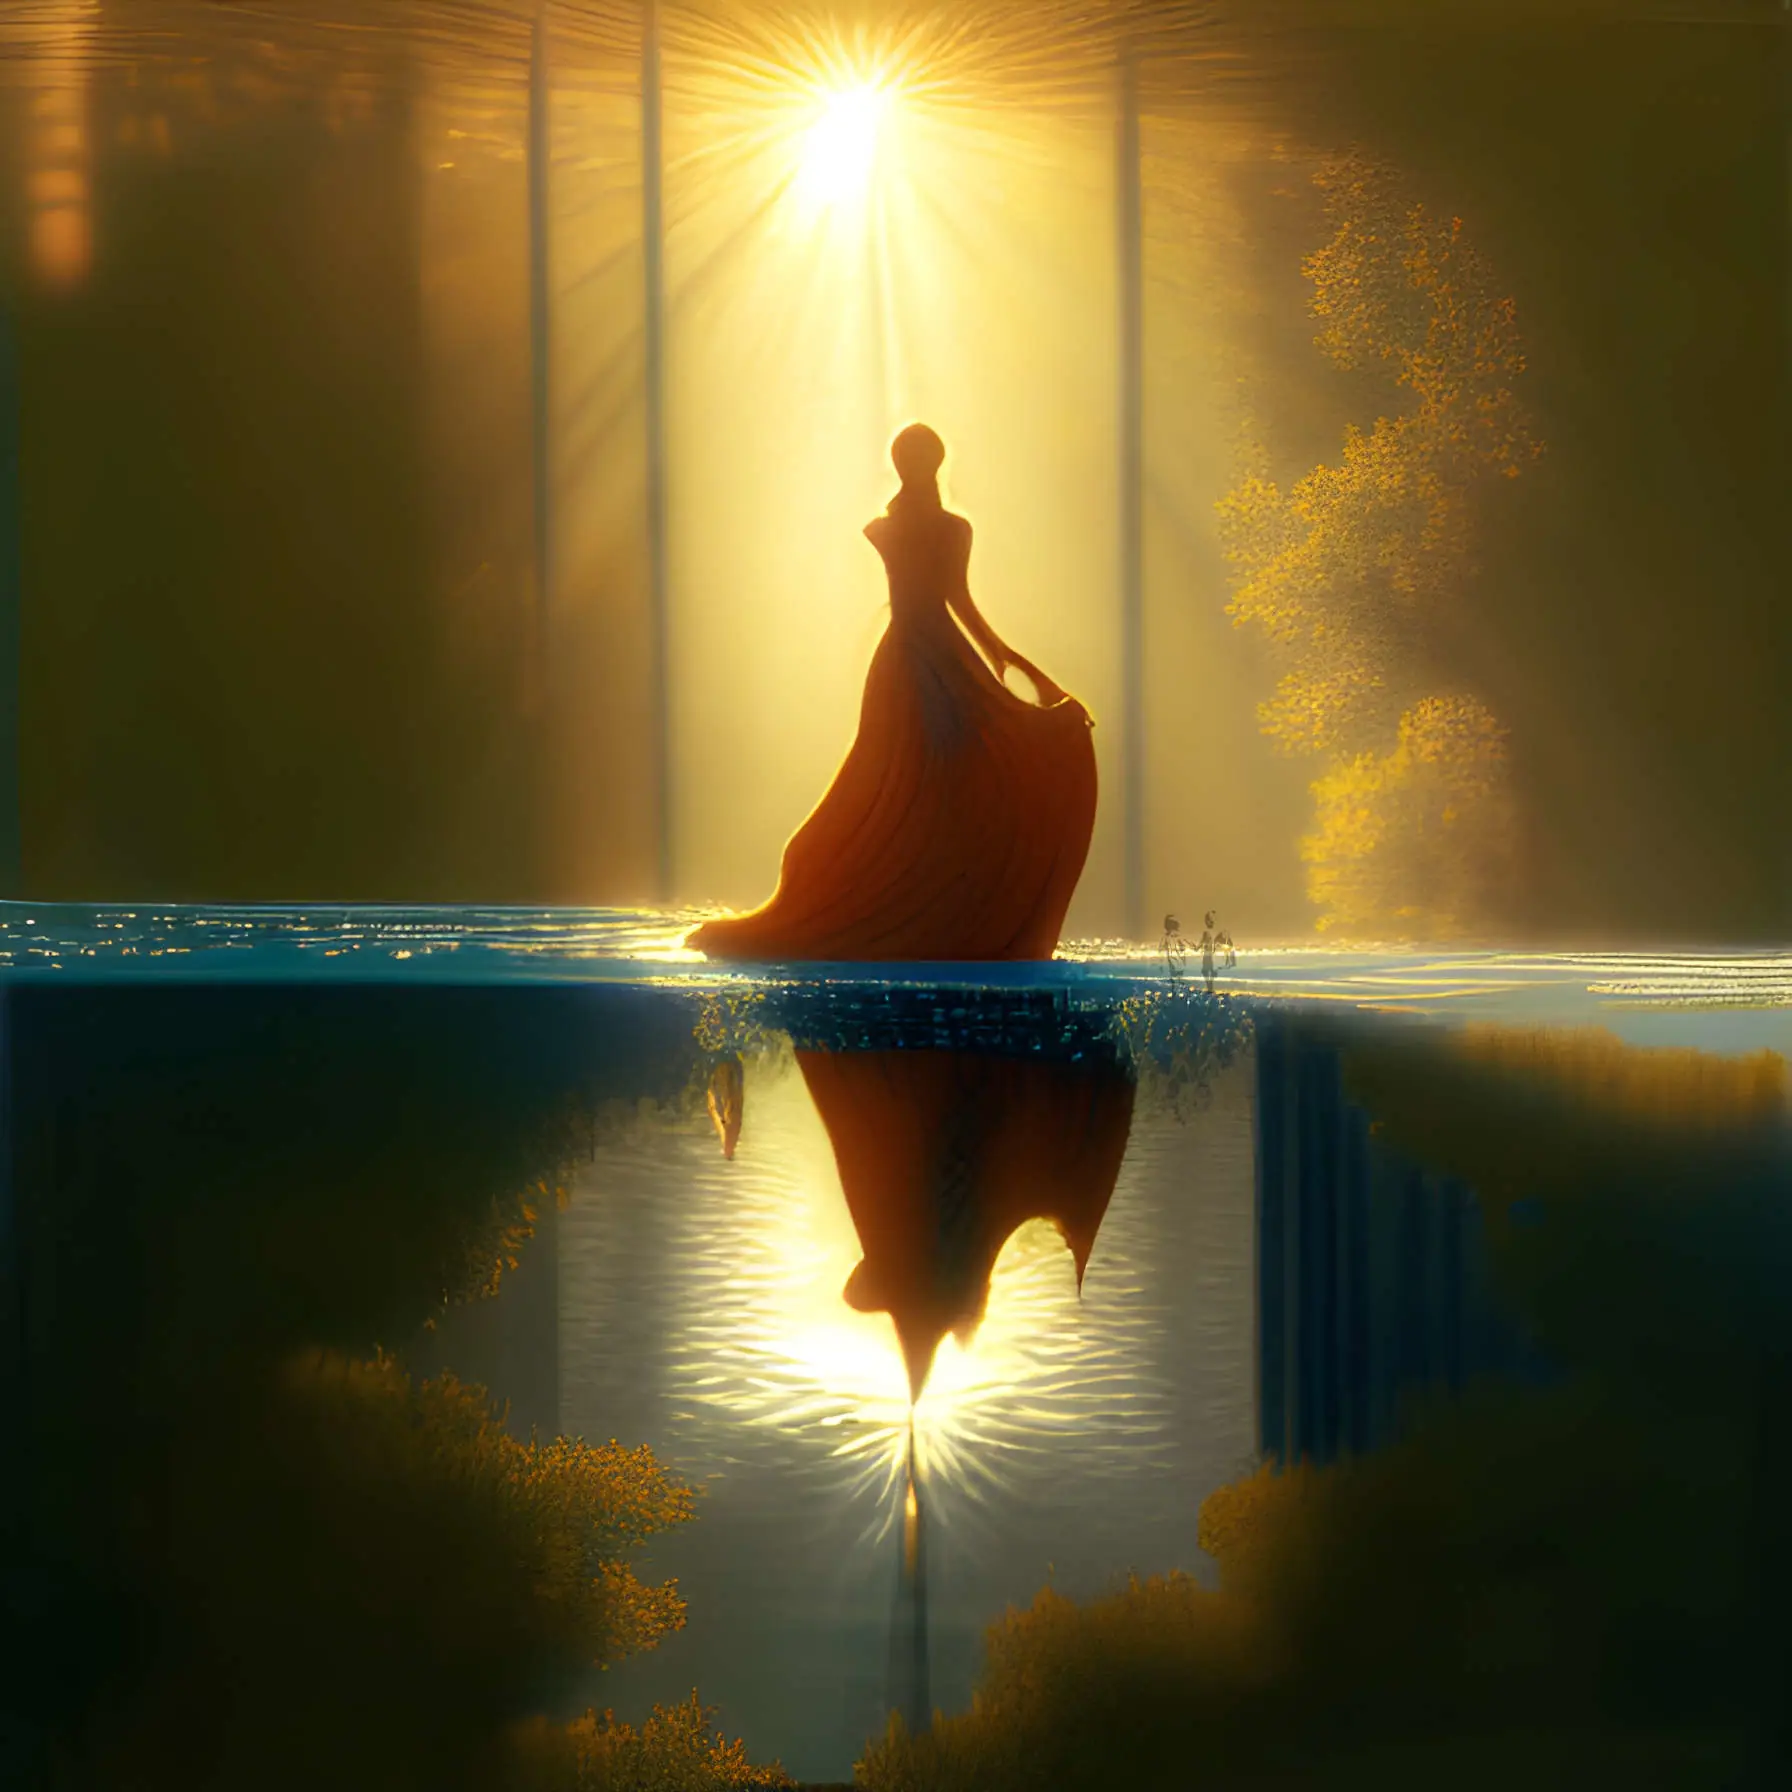 A golden woman appears to walk on water towards the light